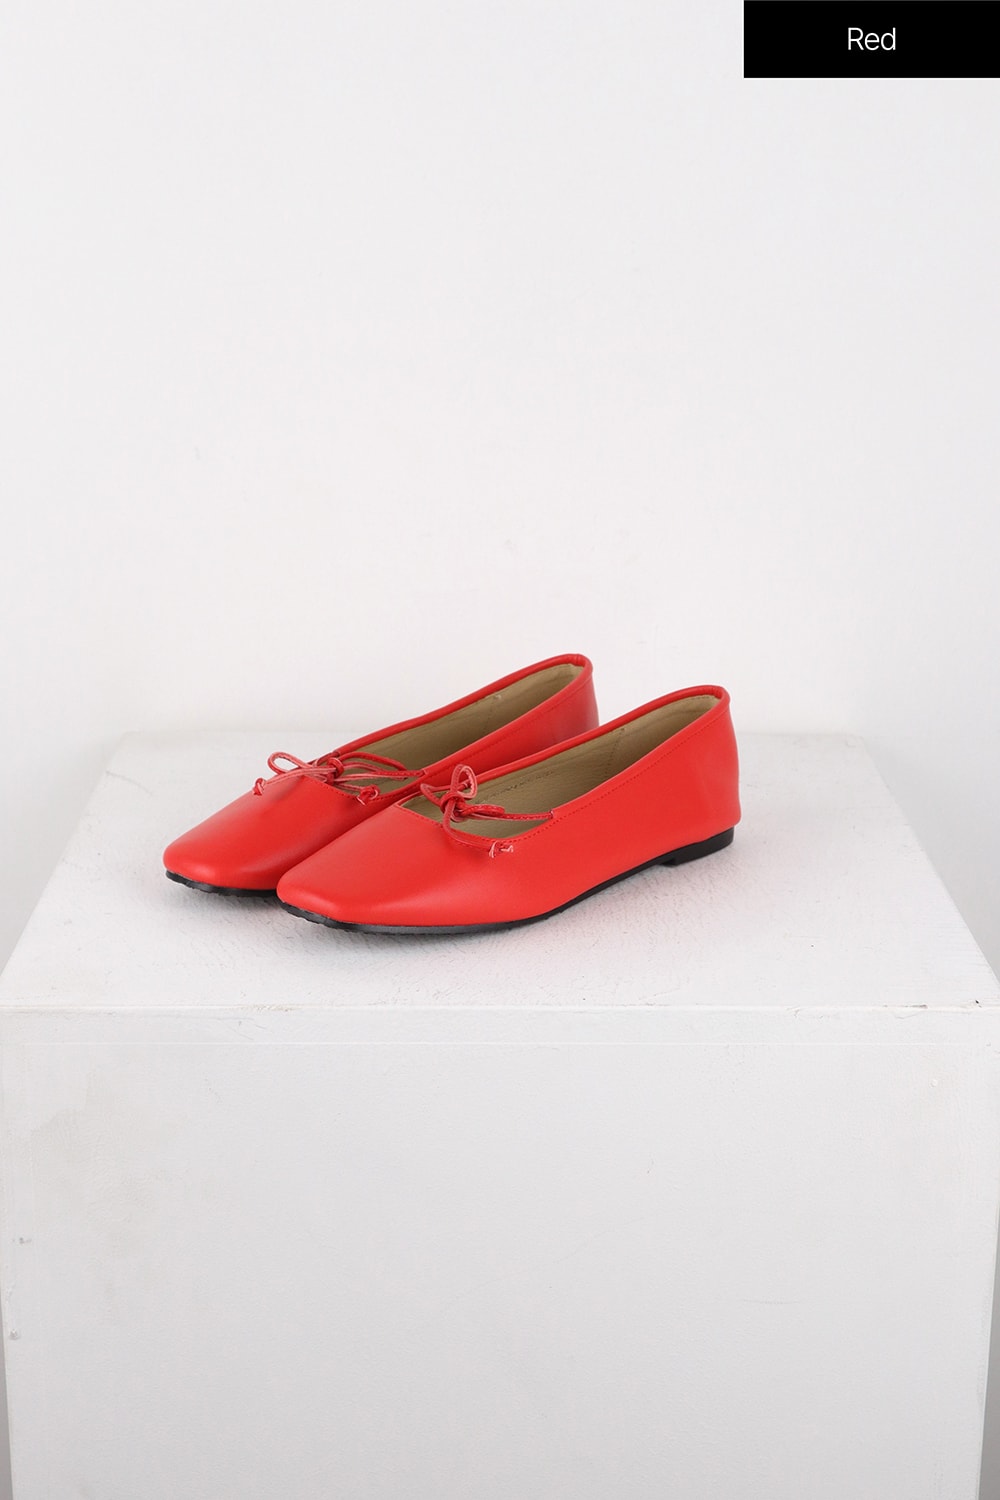 single-band-bowknot-ballet-mary-jane-flats-od326 / Red